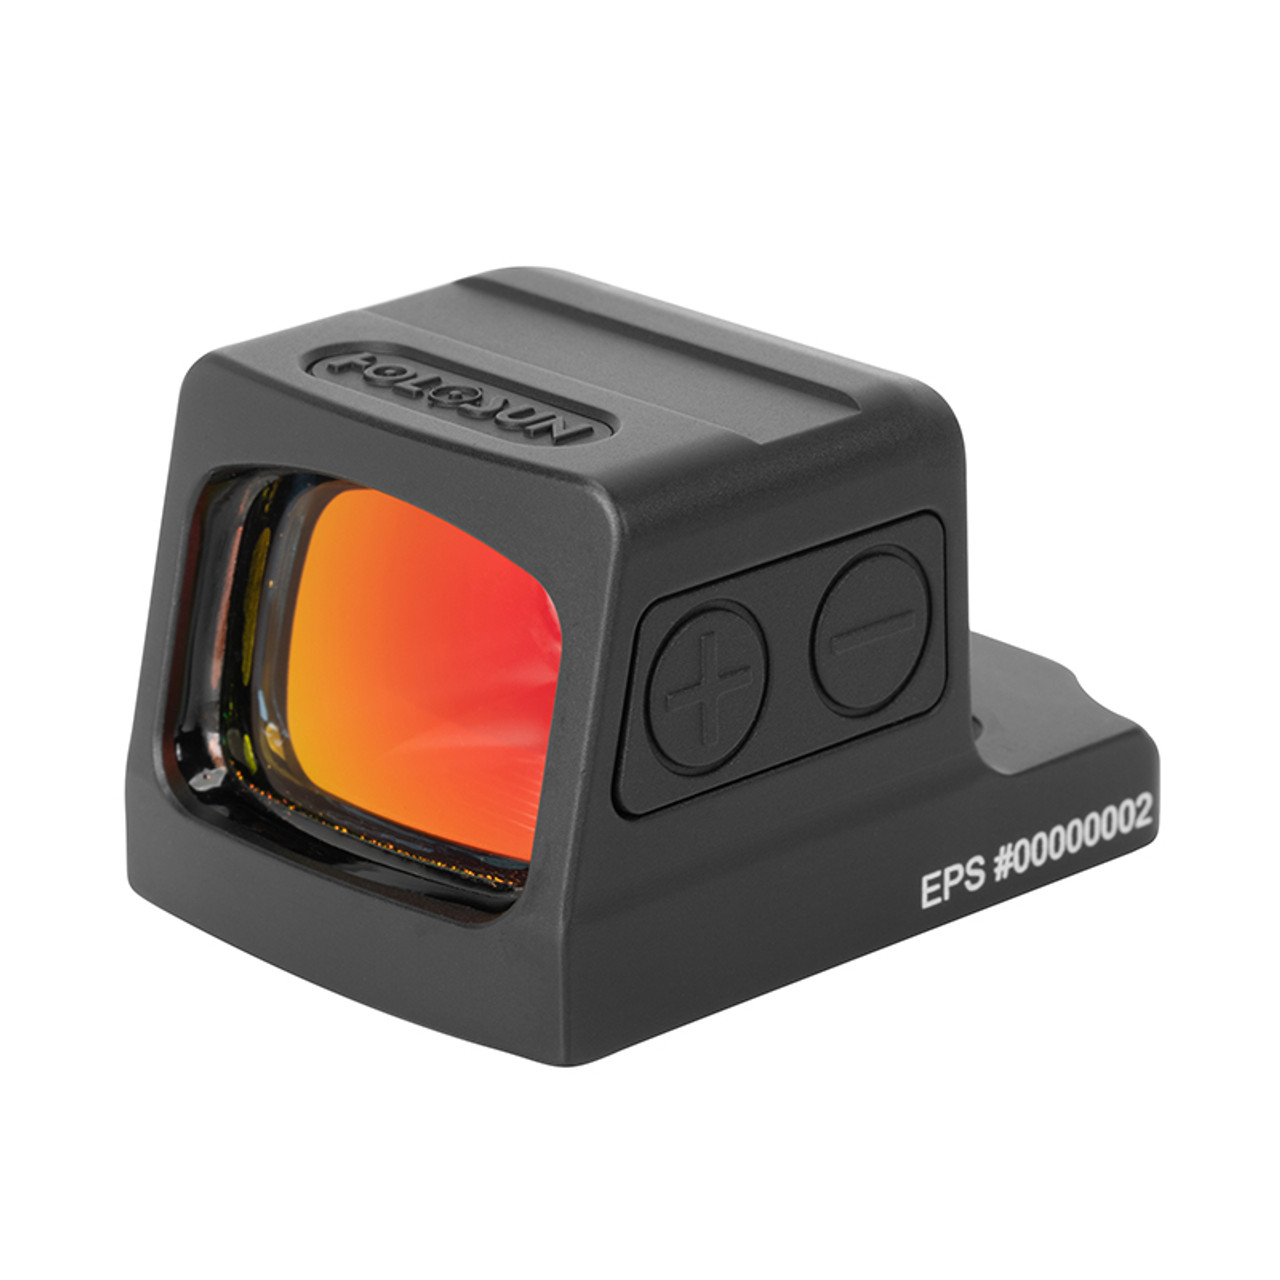 Holosun EPS MOA Red Dot Sight Fully Enclosed Emitter Micro Reflex